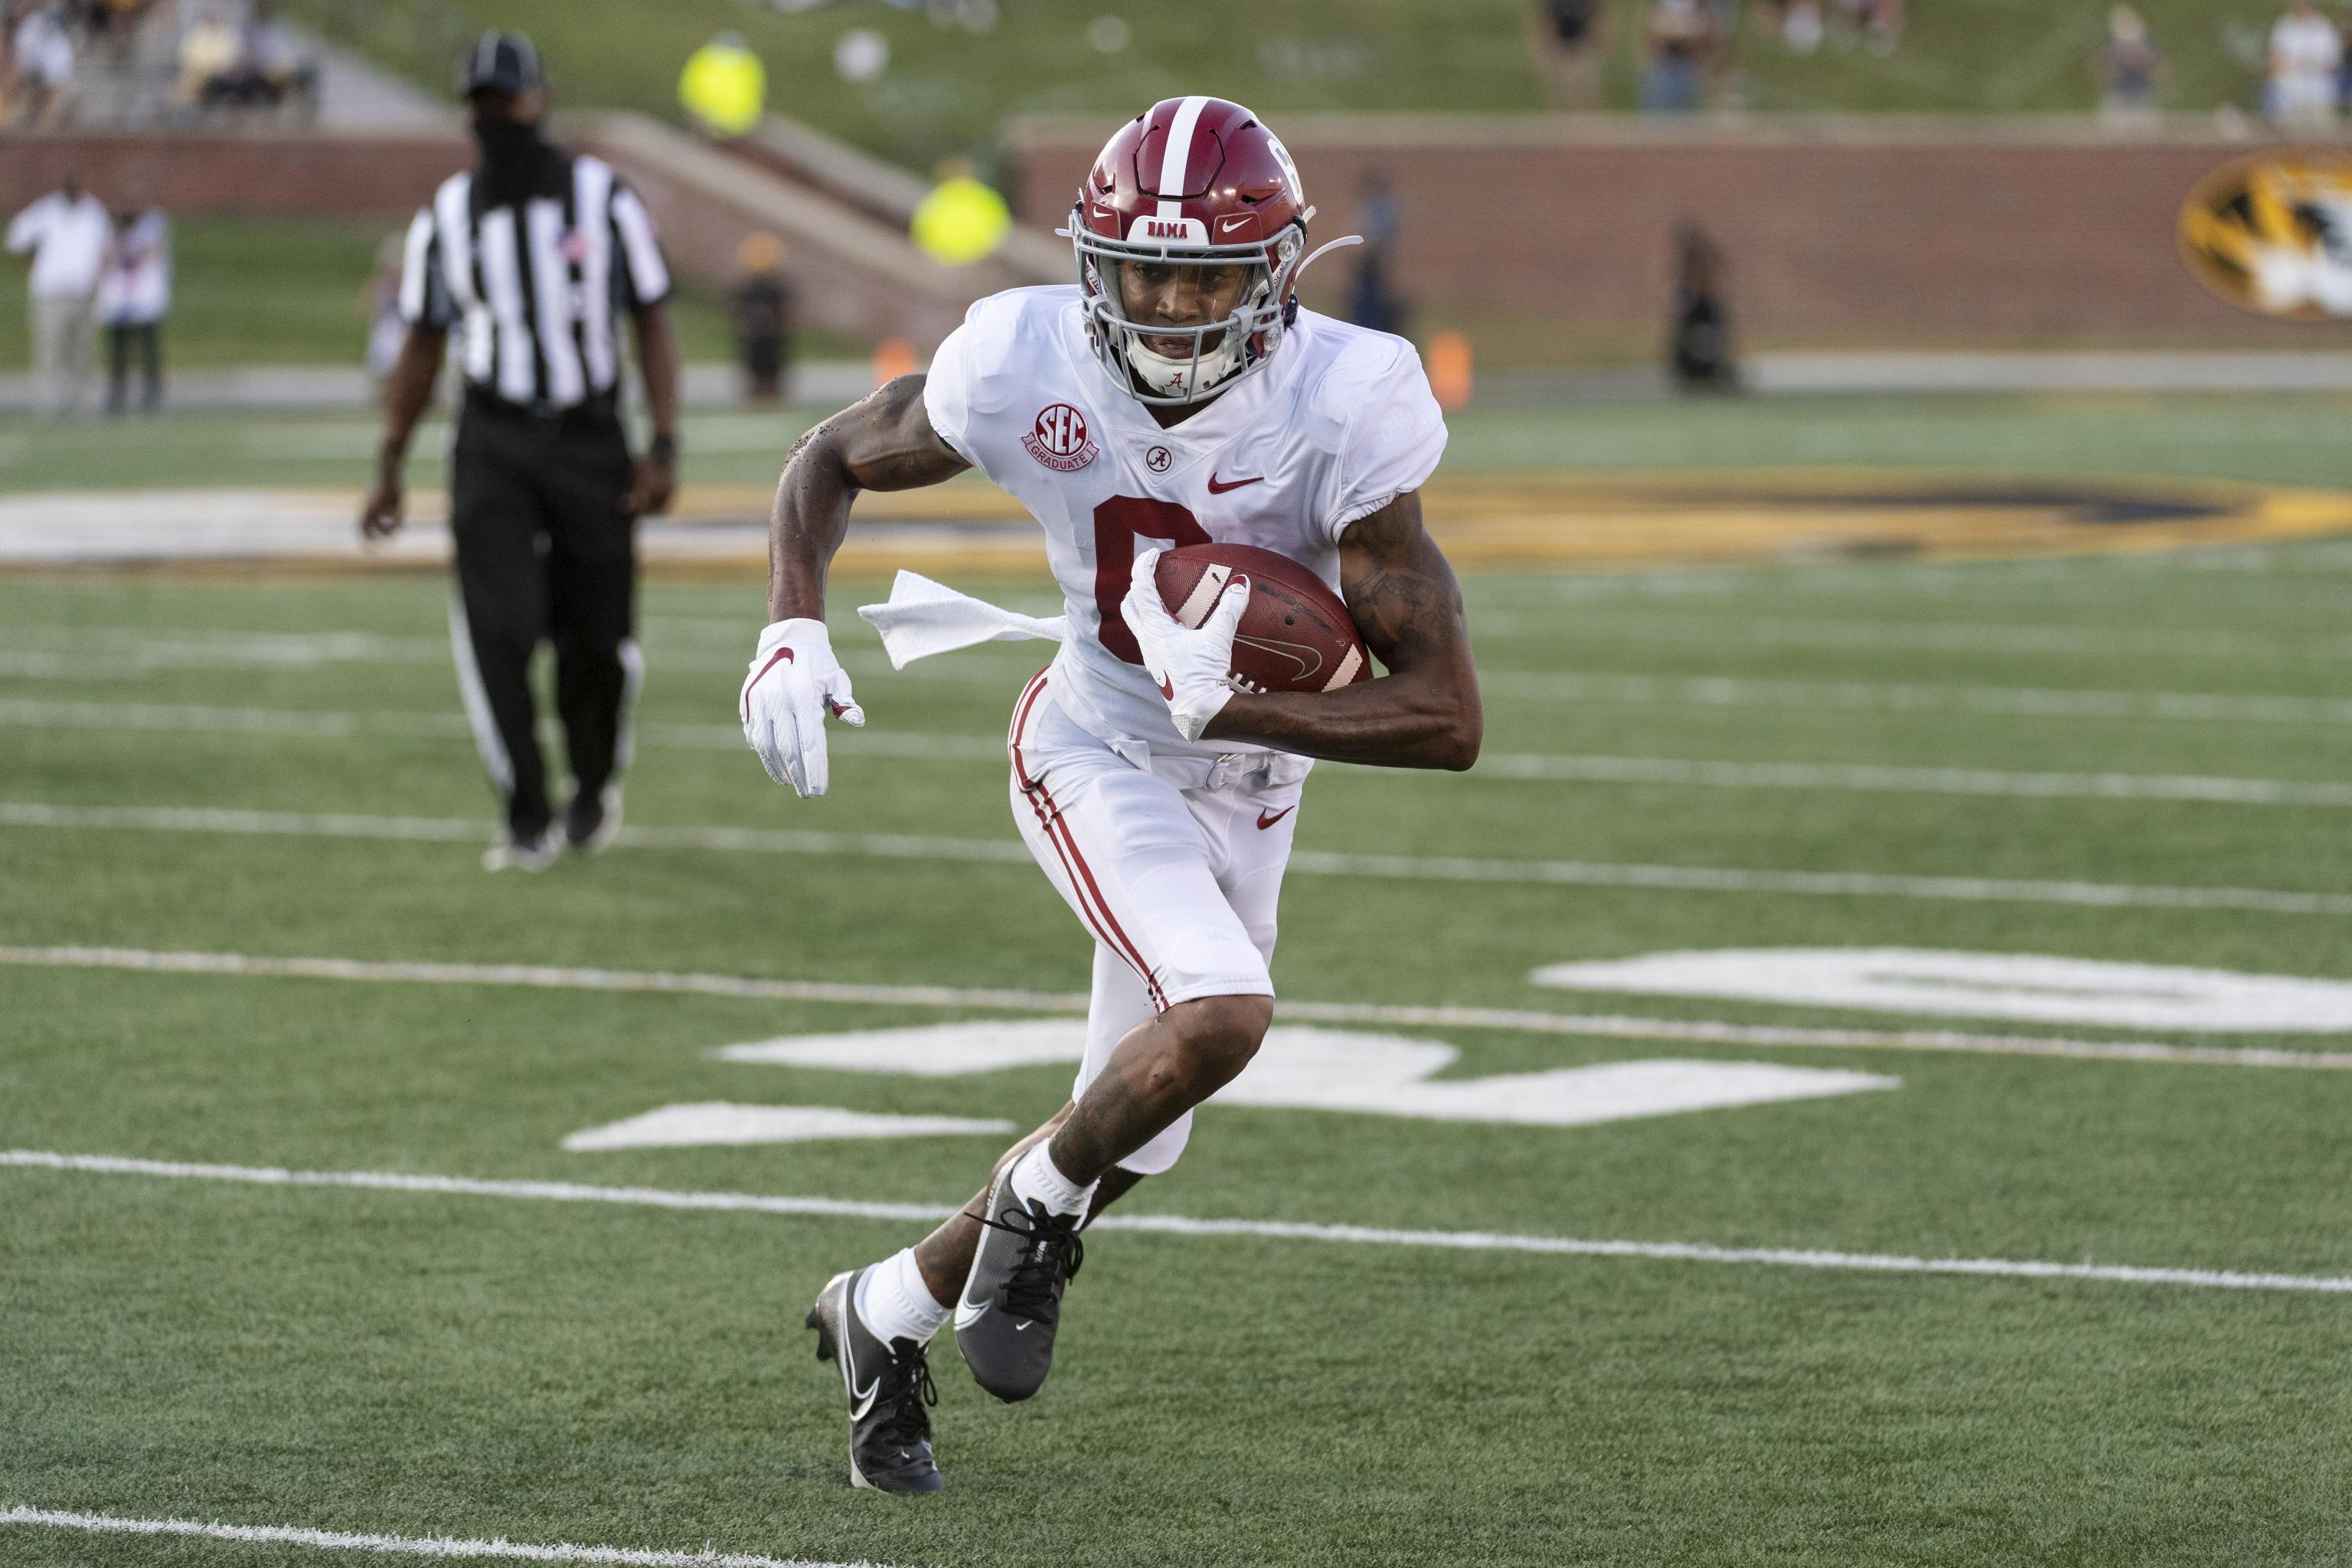 Alabama S Devonta Smith Sets Sec Record For Most Career Tds By A Wr Bleacher Report Latest News Videos And Highlights